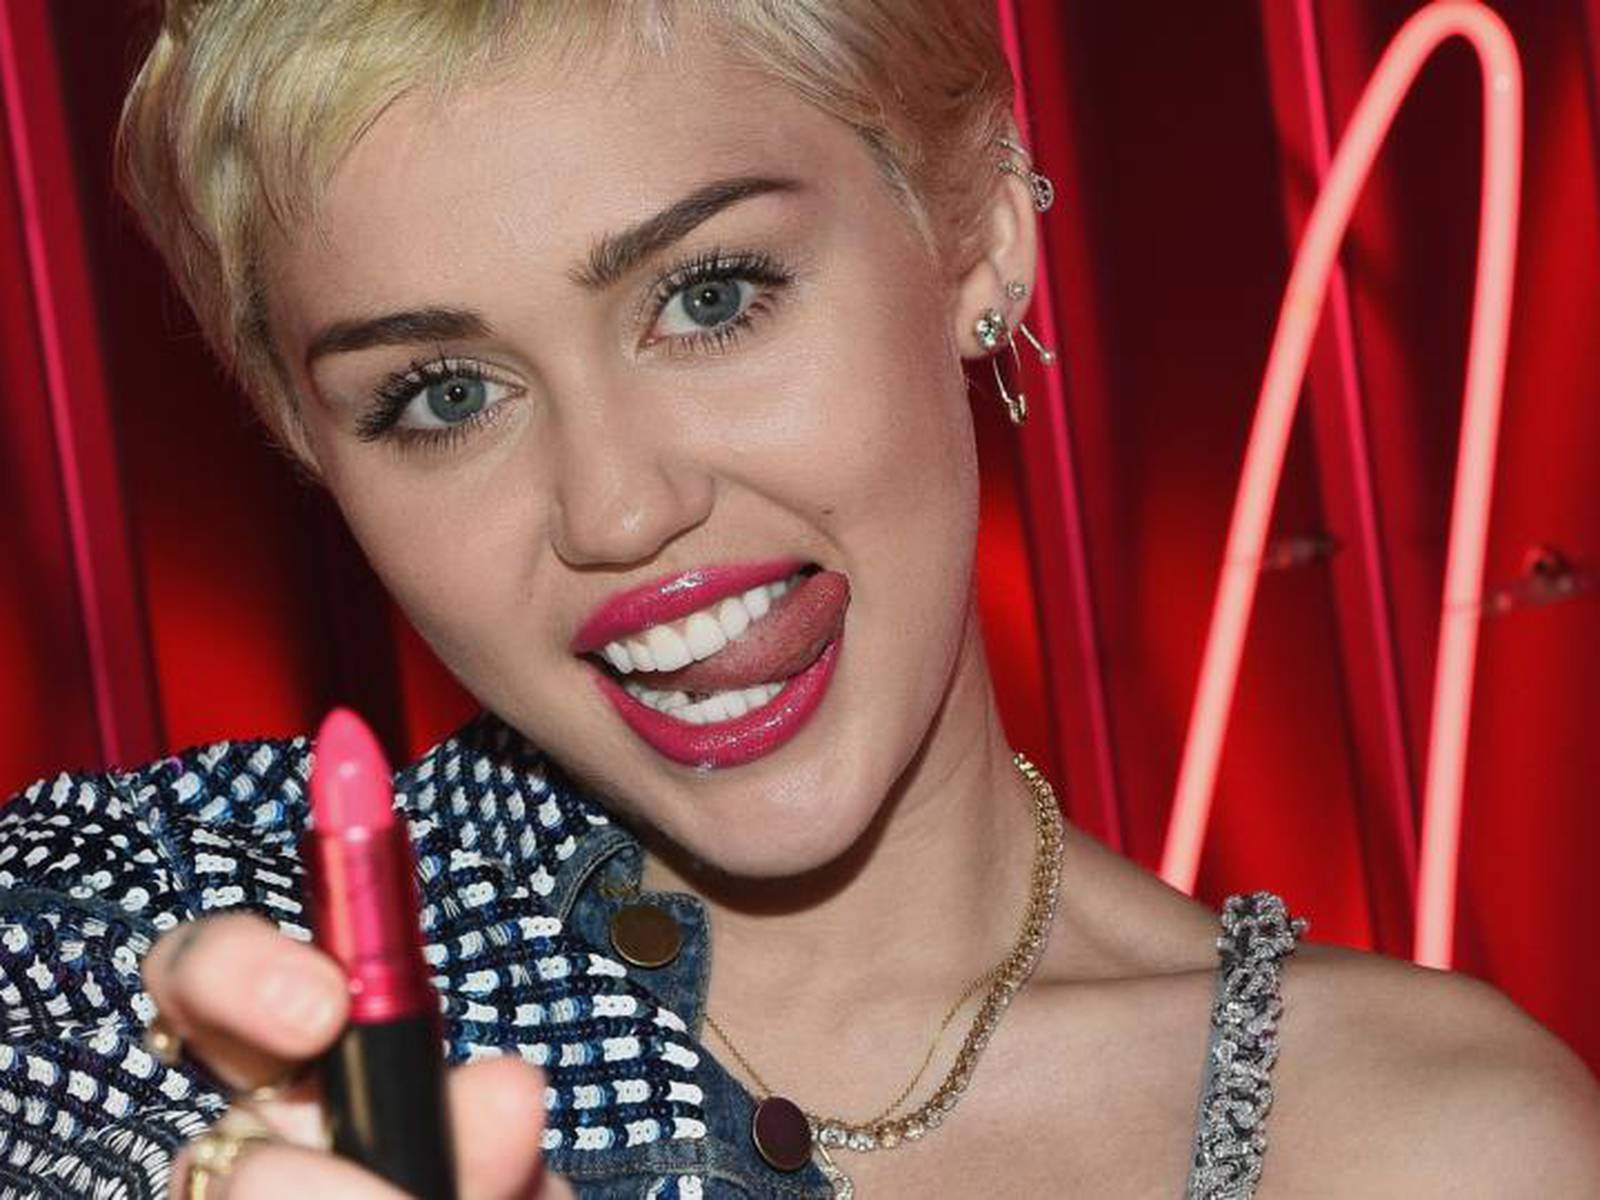 Miley Cyrus Fucked Anal - Miley Cyrus: 'I think my generation is in crisis' â€“ The Irish Times